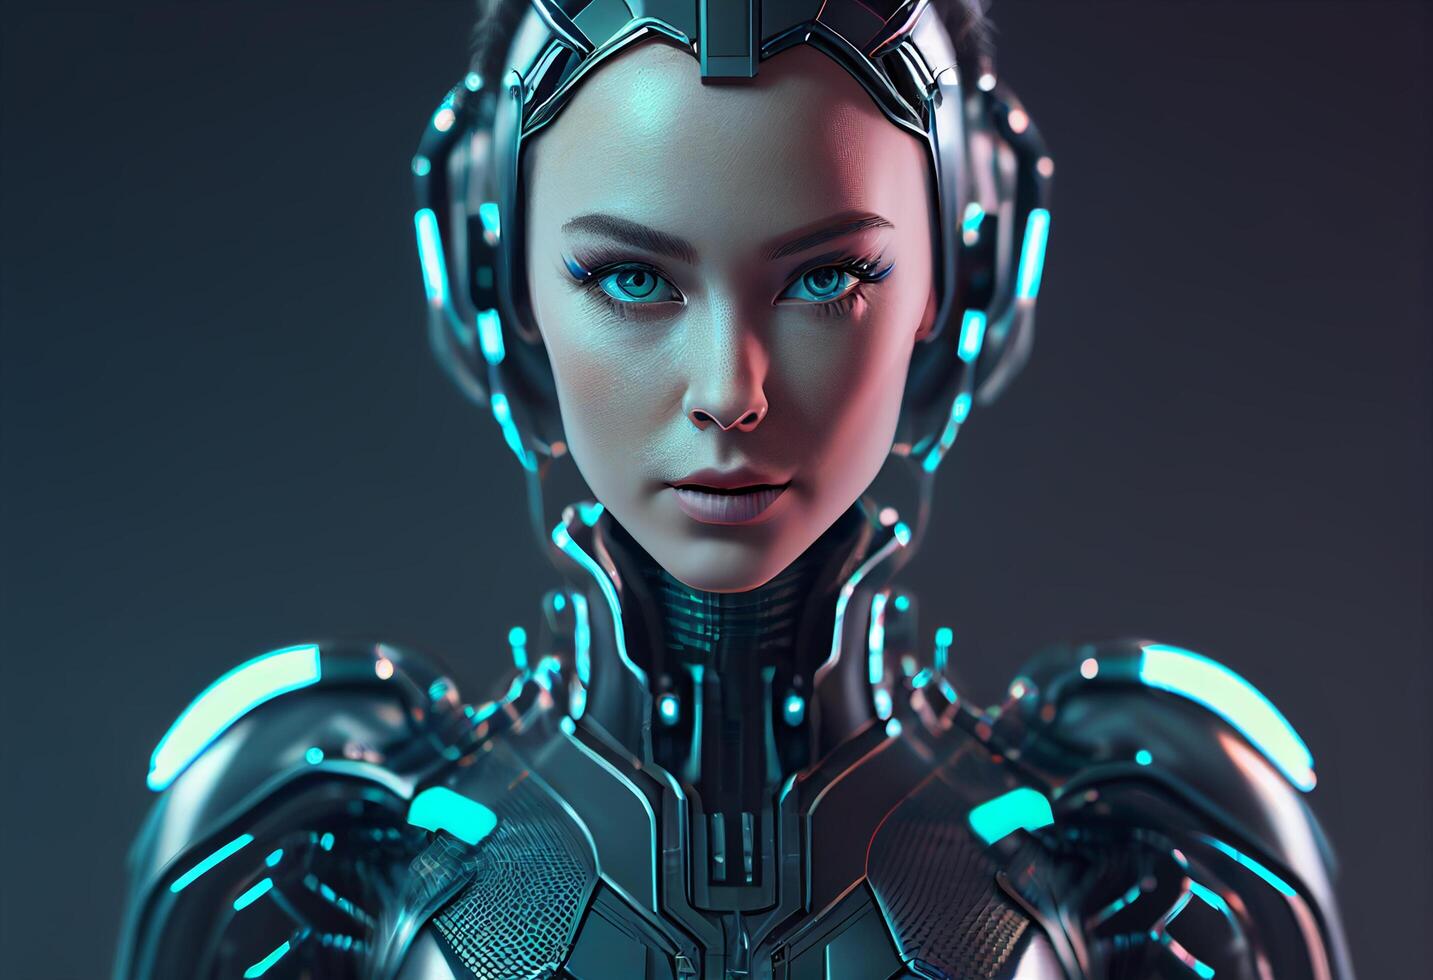 3D rendering of a female alien with futuristic make up and